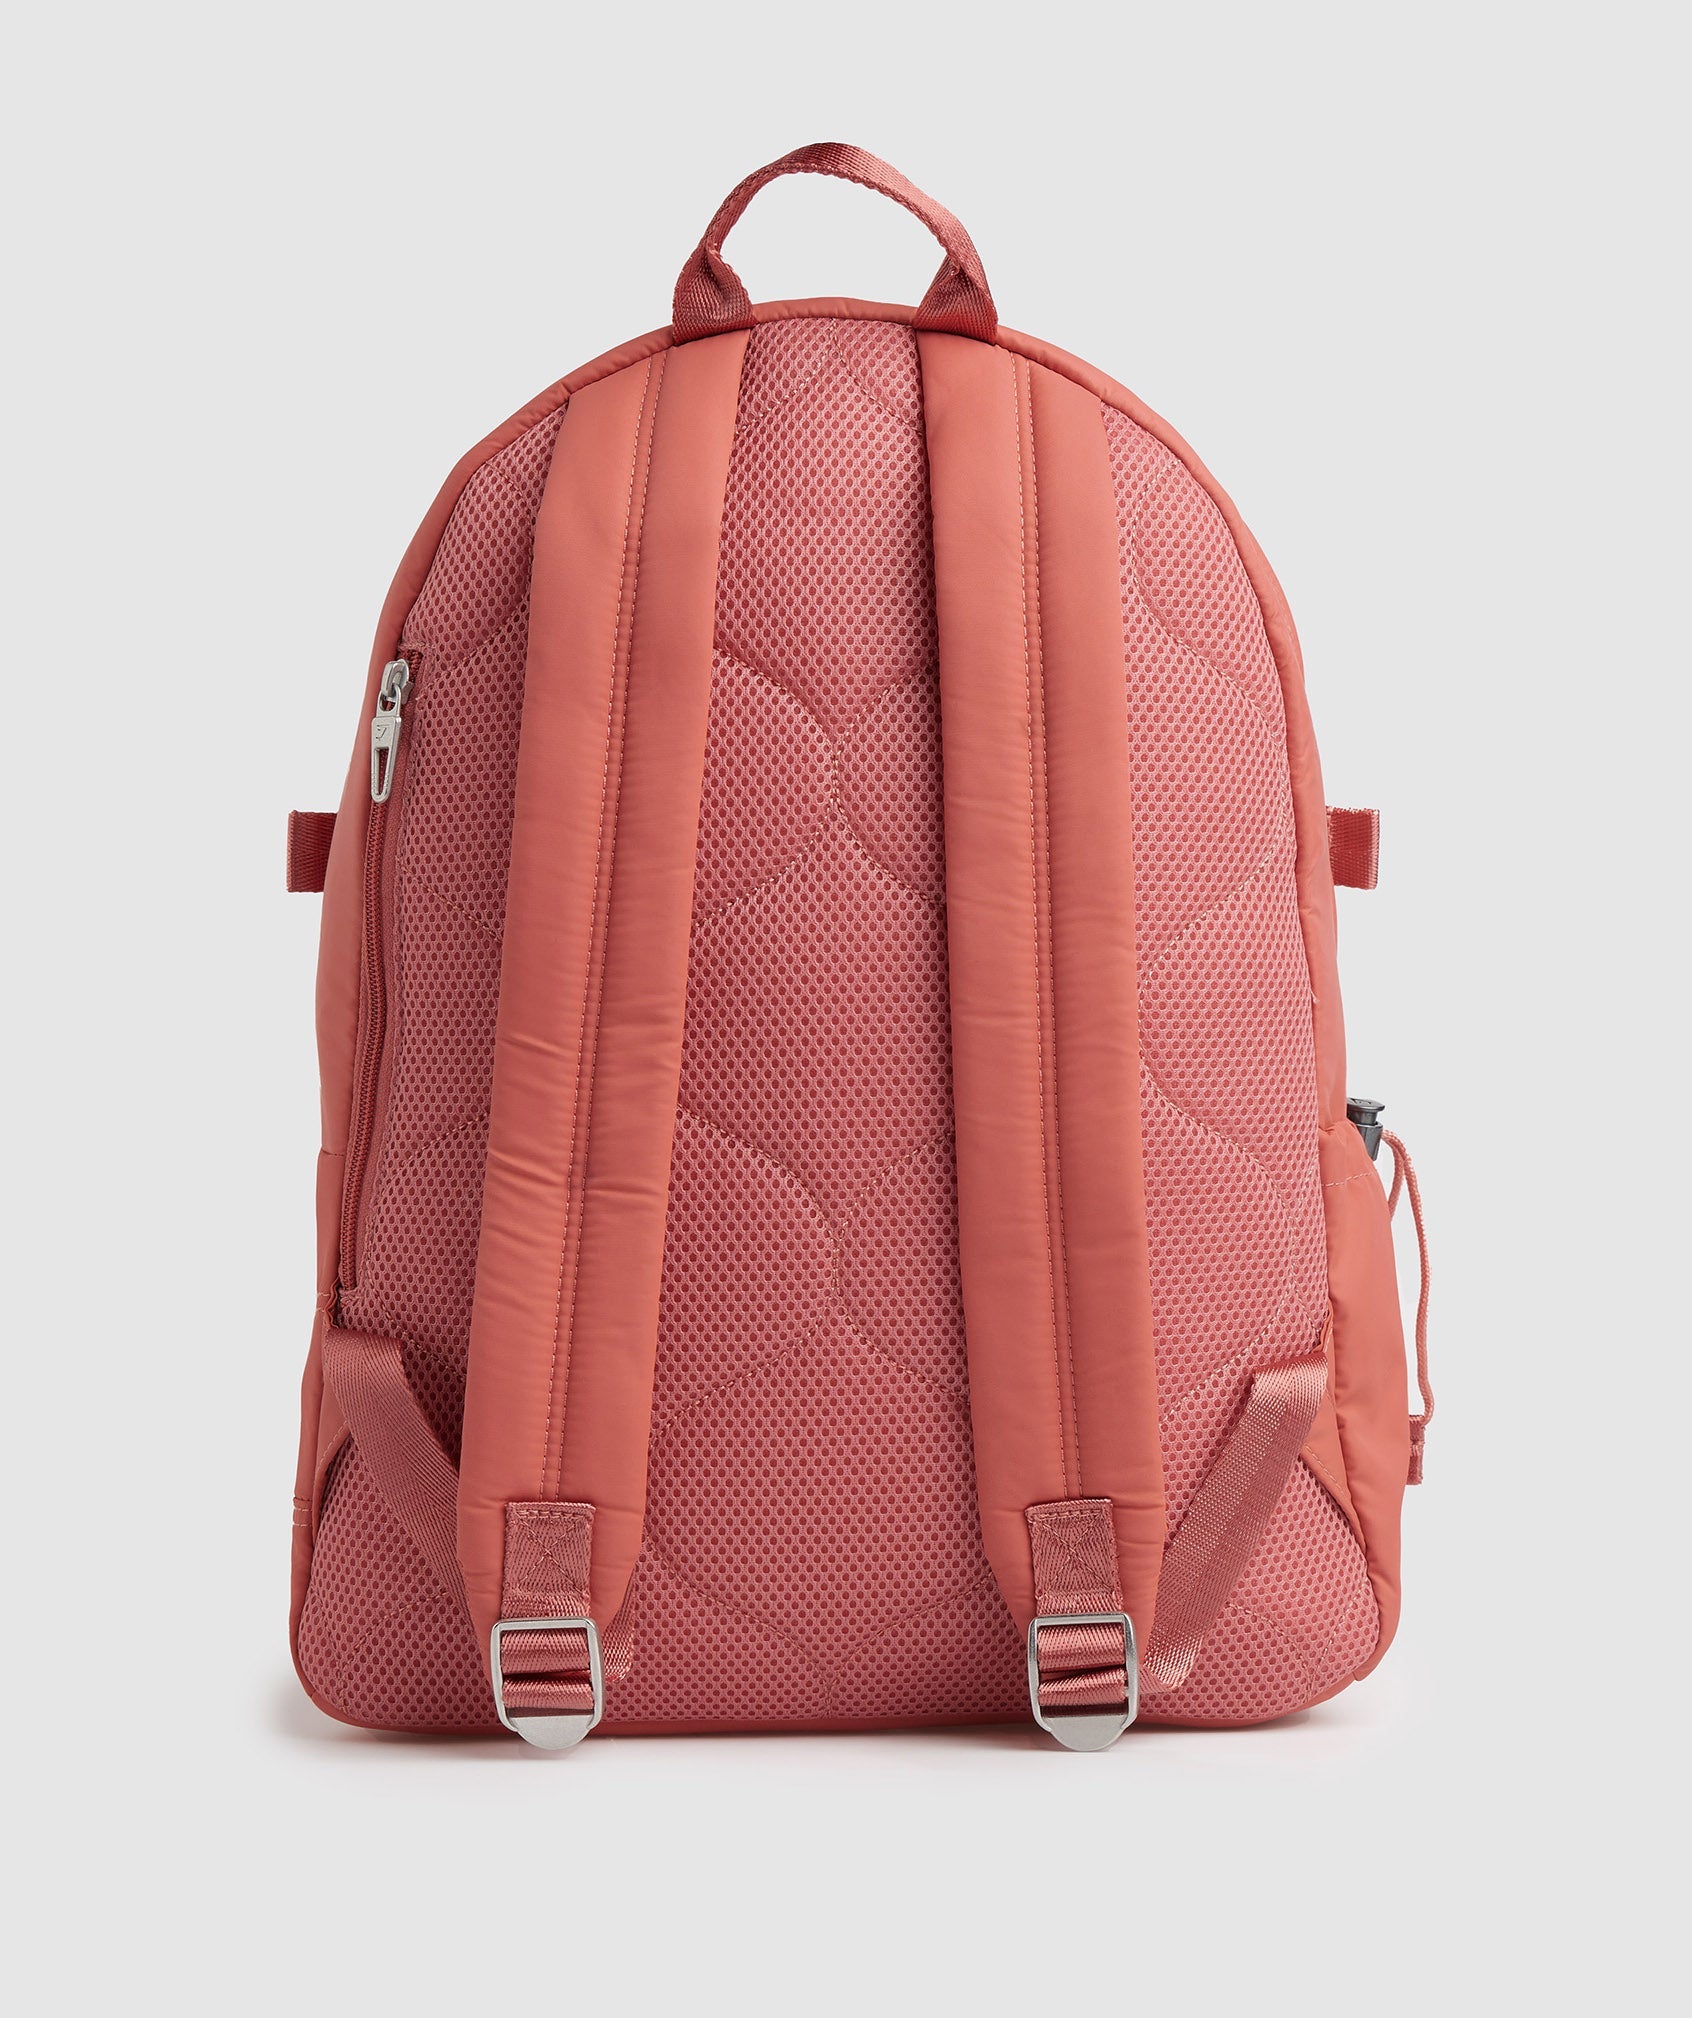 Premium Lifestyle Backpack in Terracotta Pink - view 2